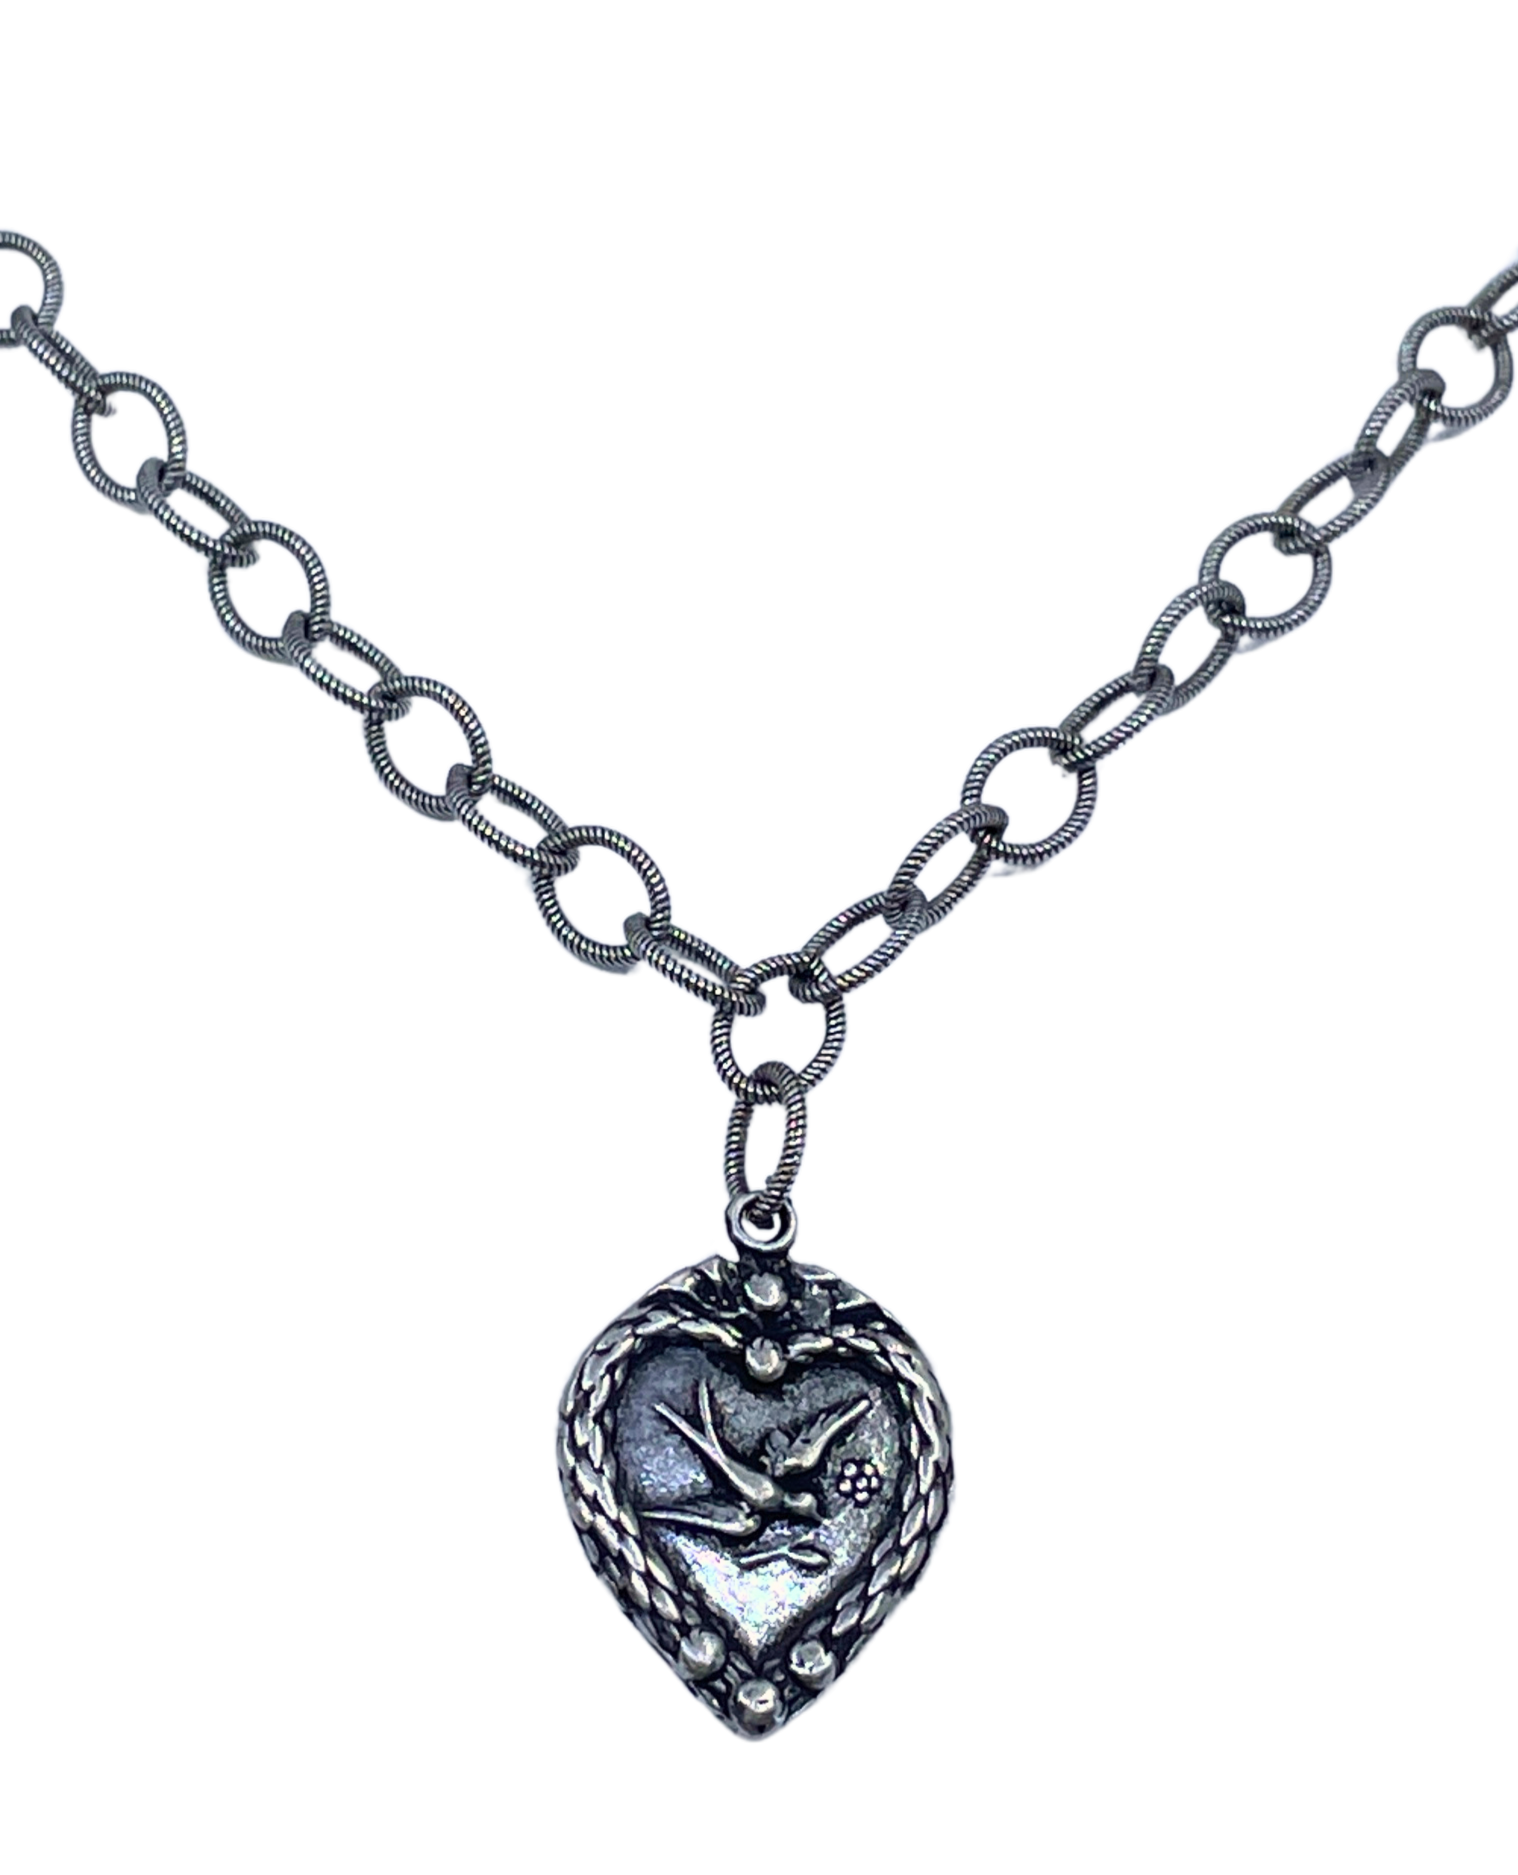 Vintage Reproduction Sterling Plated Chain with Dove Heart